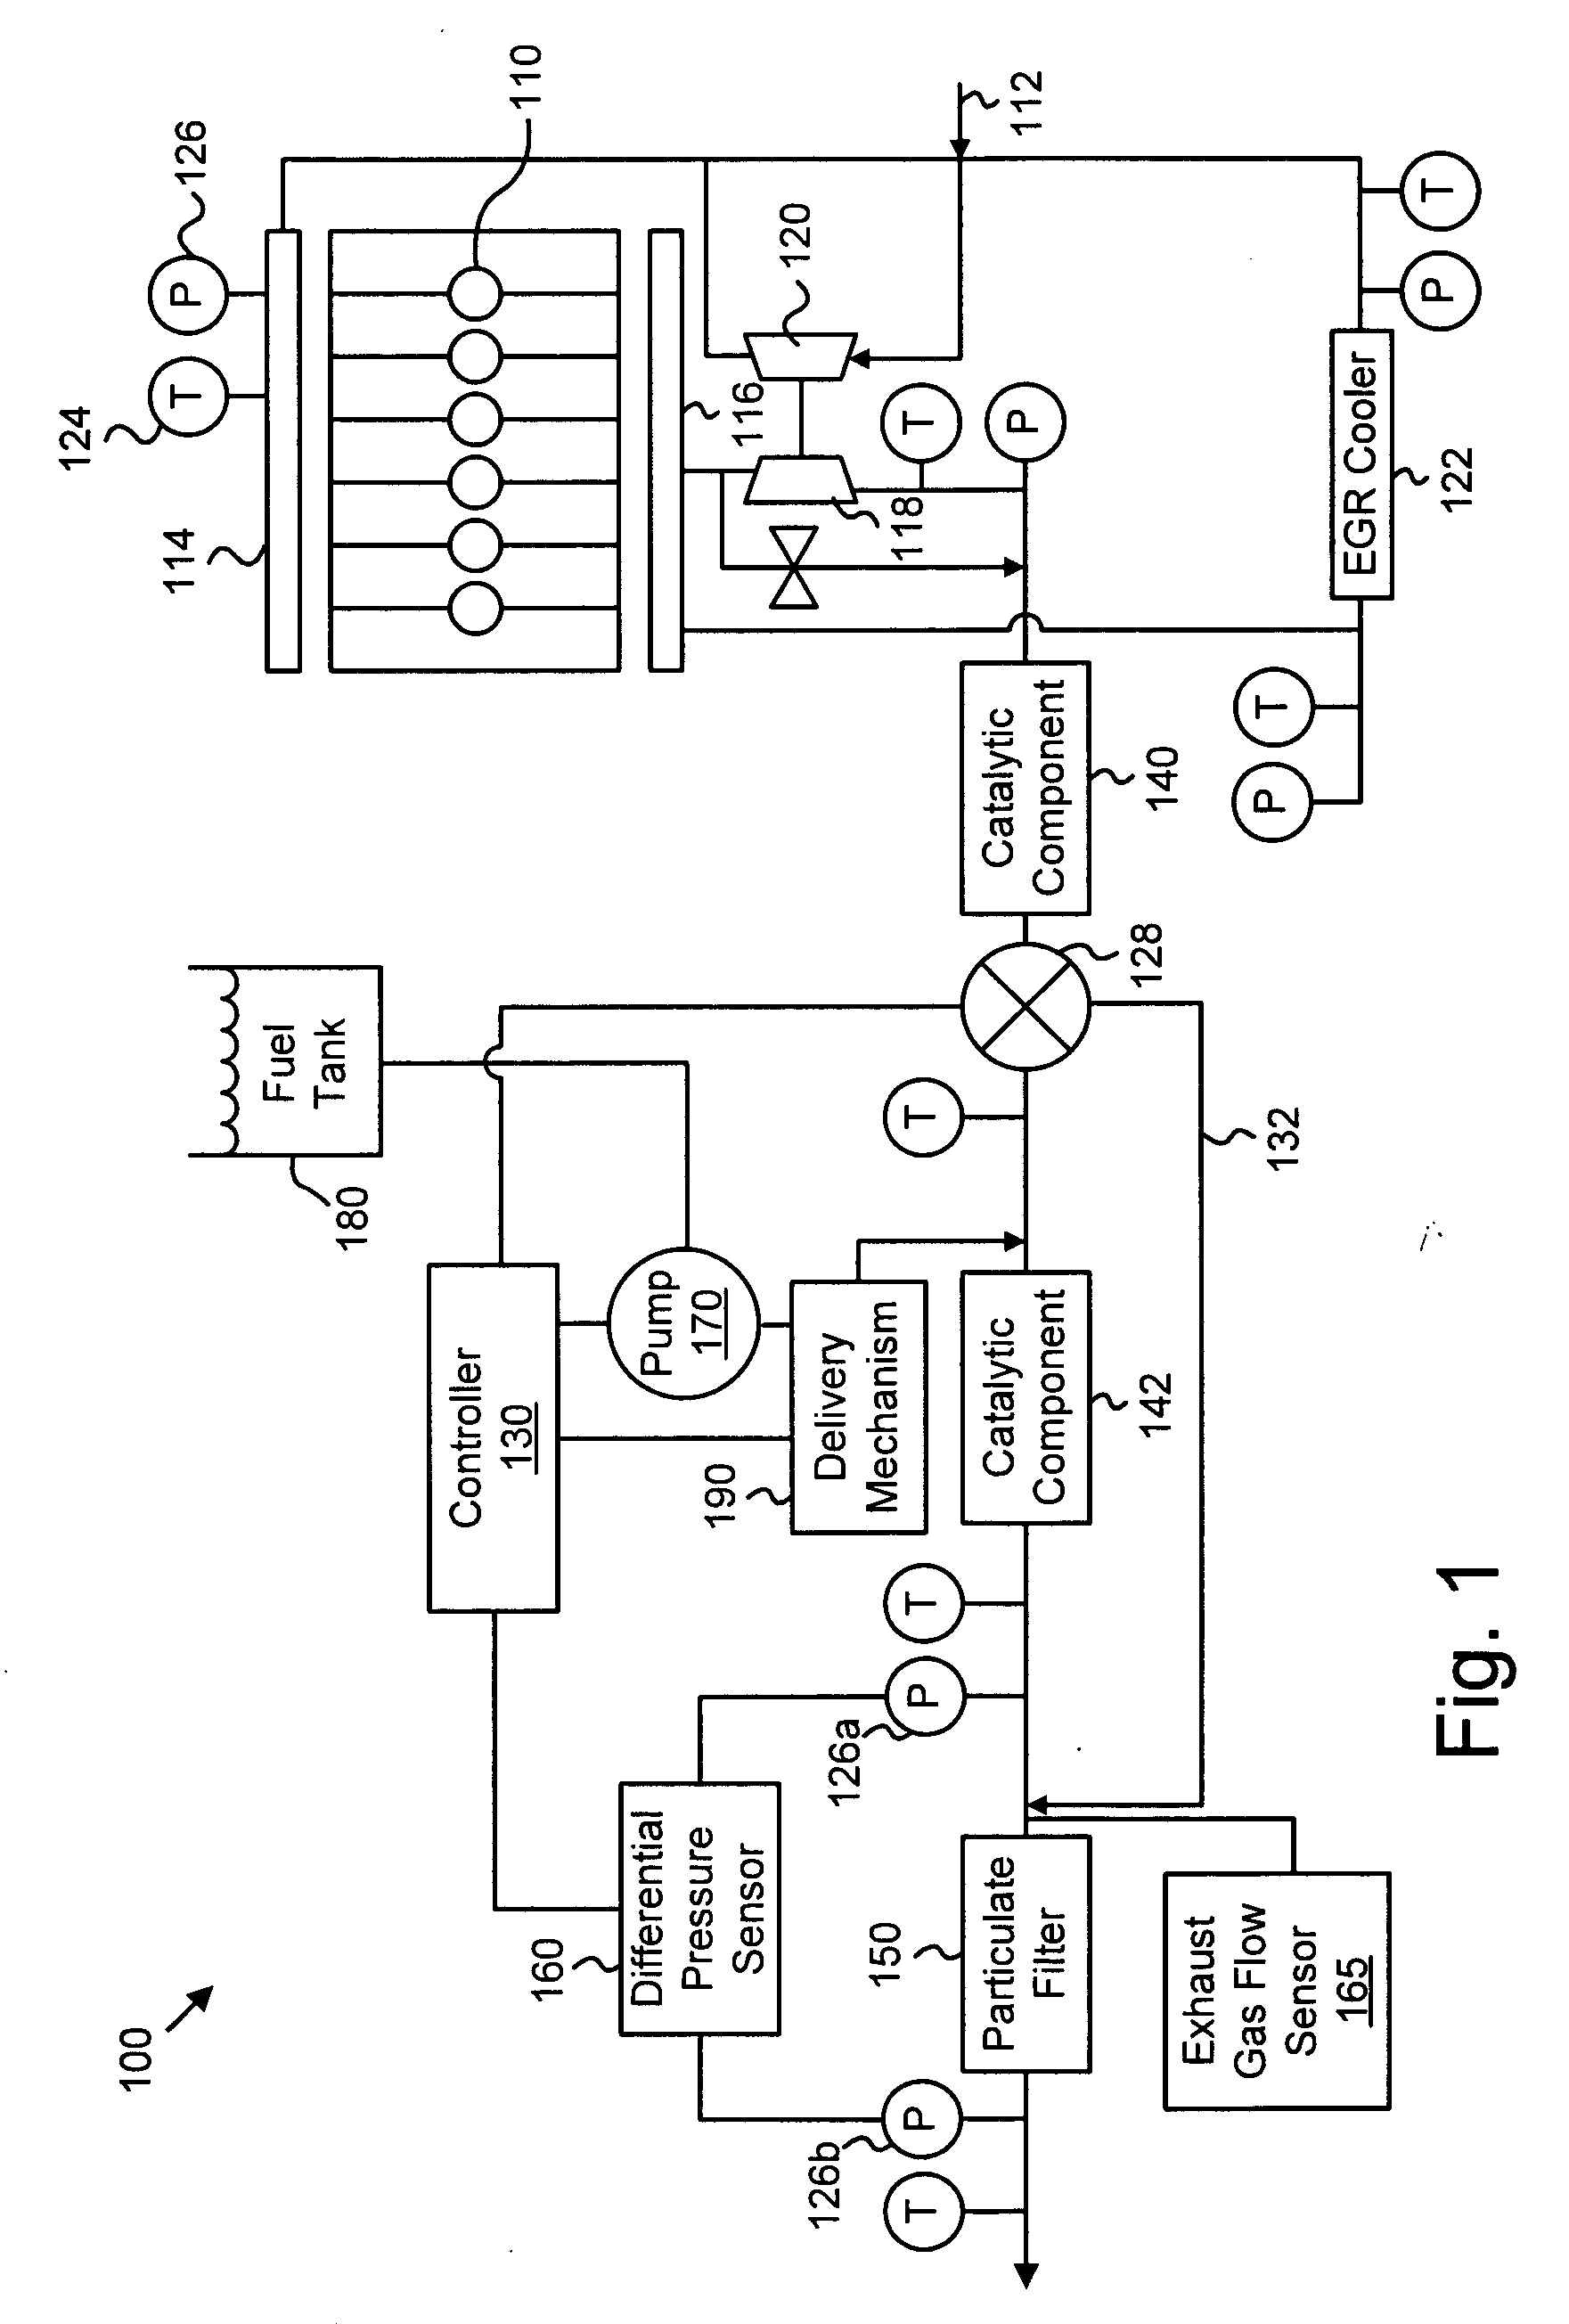 Apparatus, system, and method for determining and implementing estimate reliability